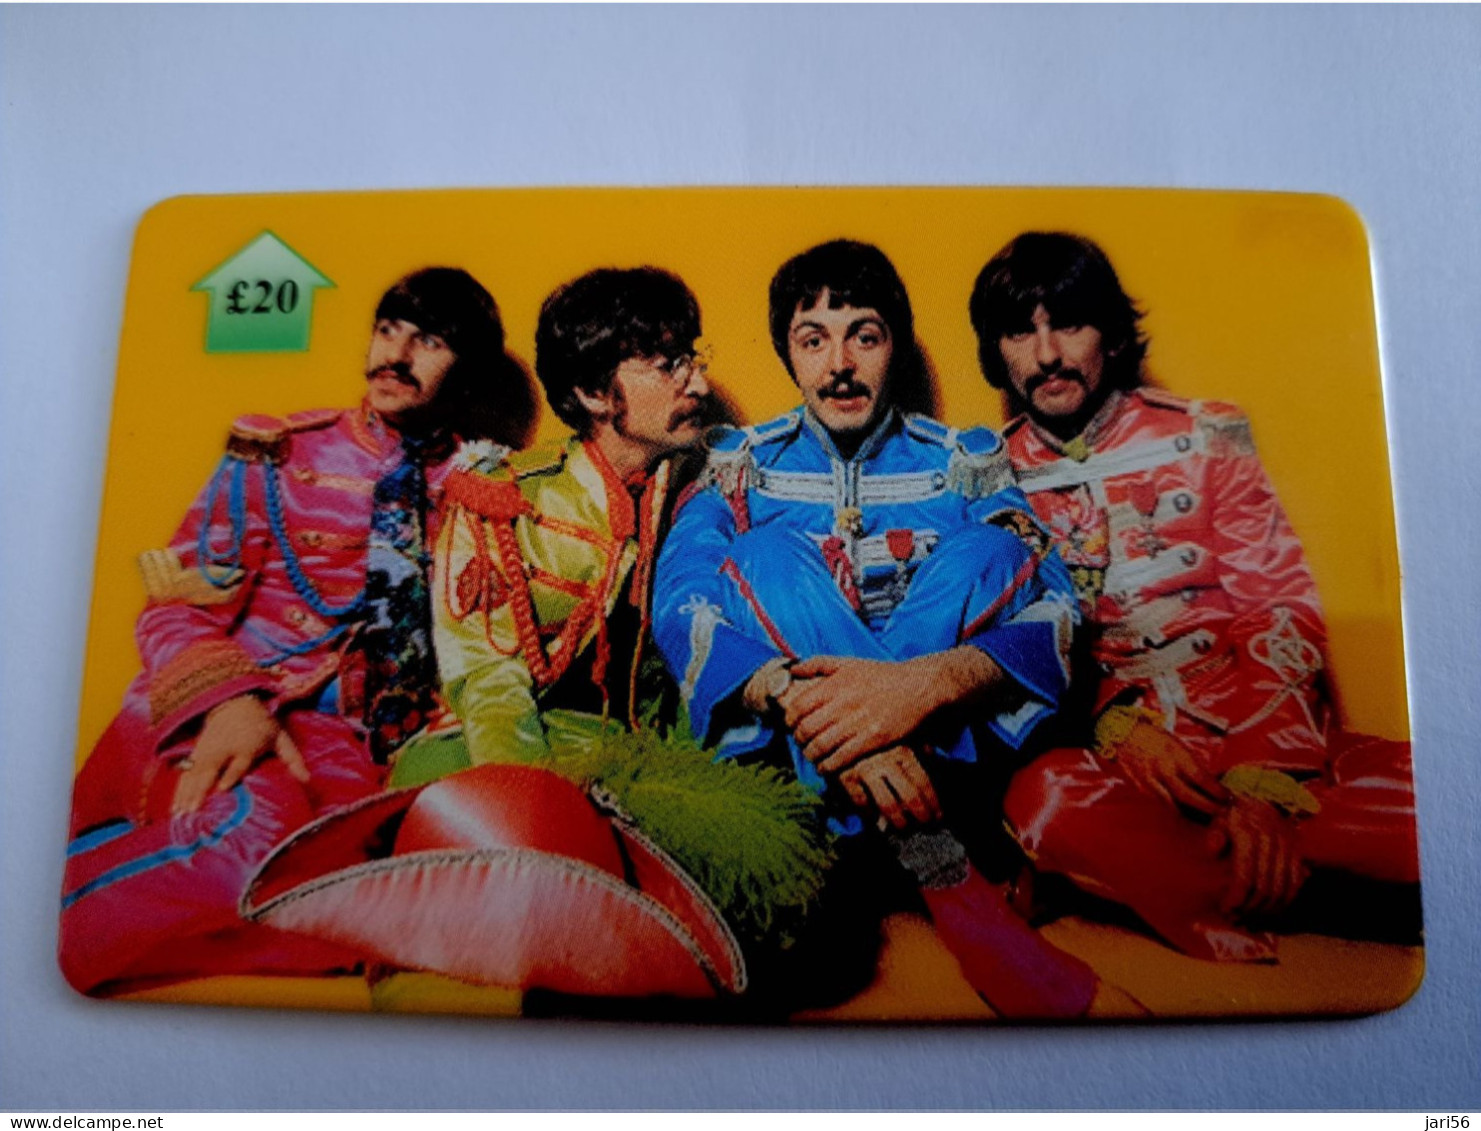 GREAT BRITAIN / 20 POUND /MAGSTRIPE  / BEATLES  PHONECARD/ LIMITED EDITION/  ONLY 500 EX     **15692** - Verzamelingen